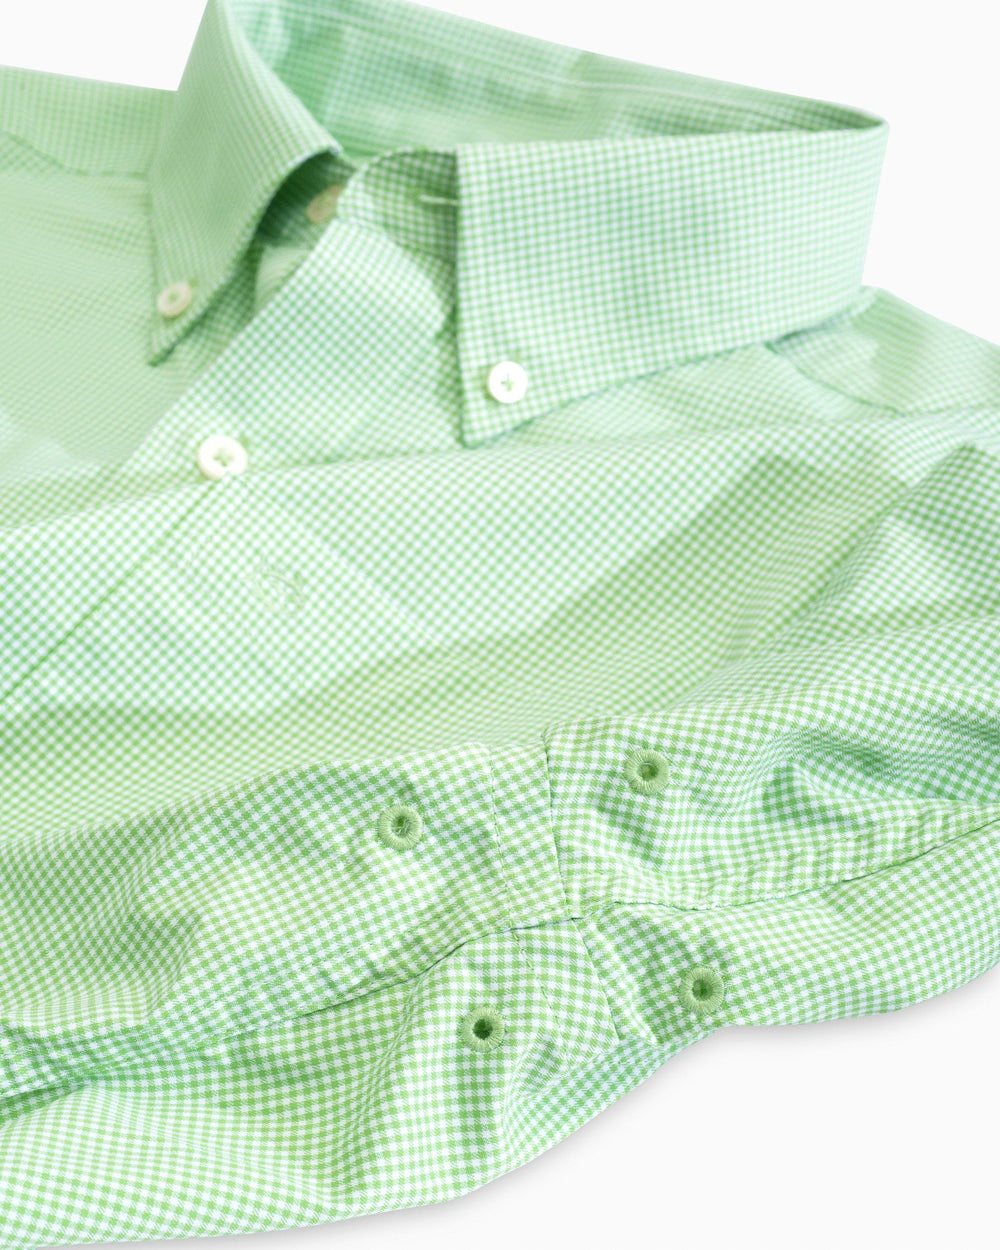 Arm vents of the Men's Green Micro Gingham Intercoastal Performance Sport Shirt by Southern Tide - Green Tea